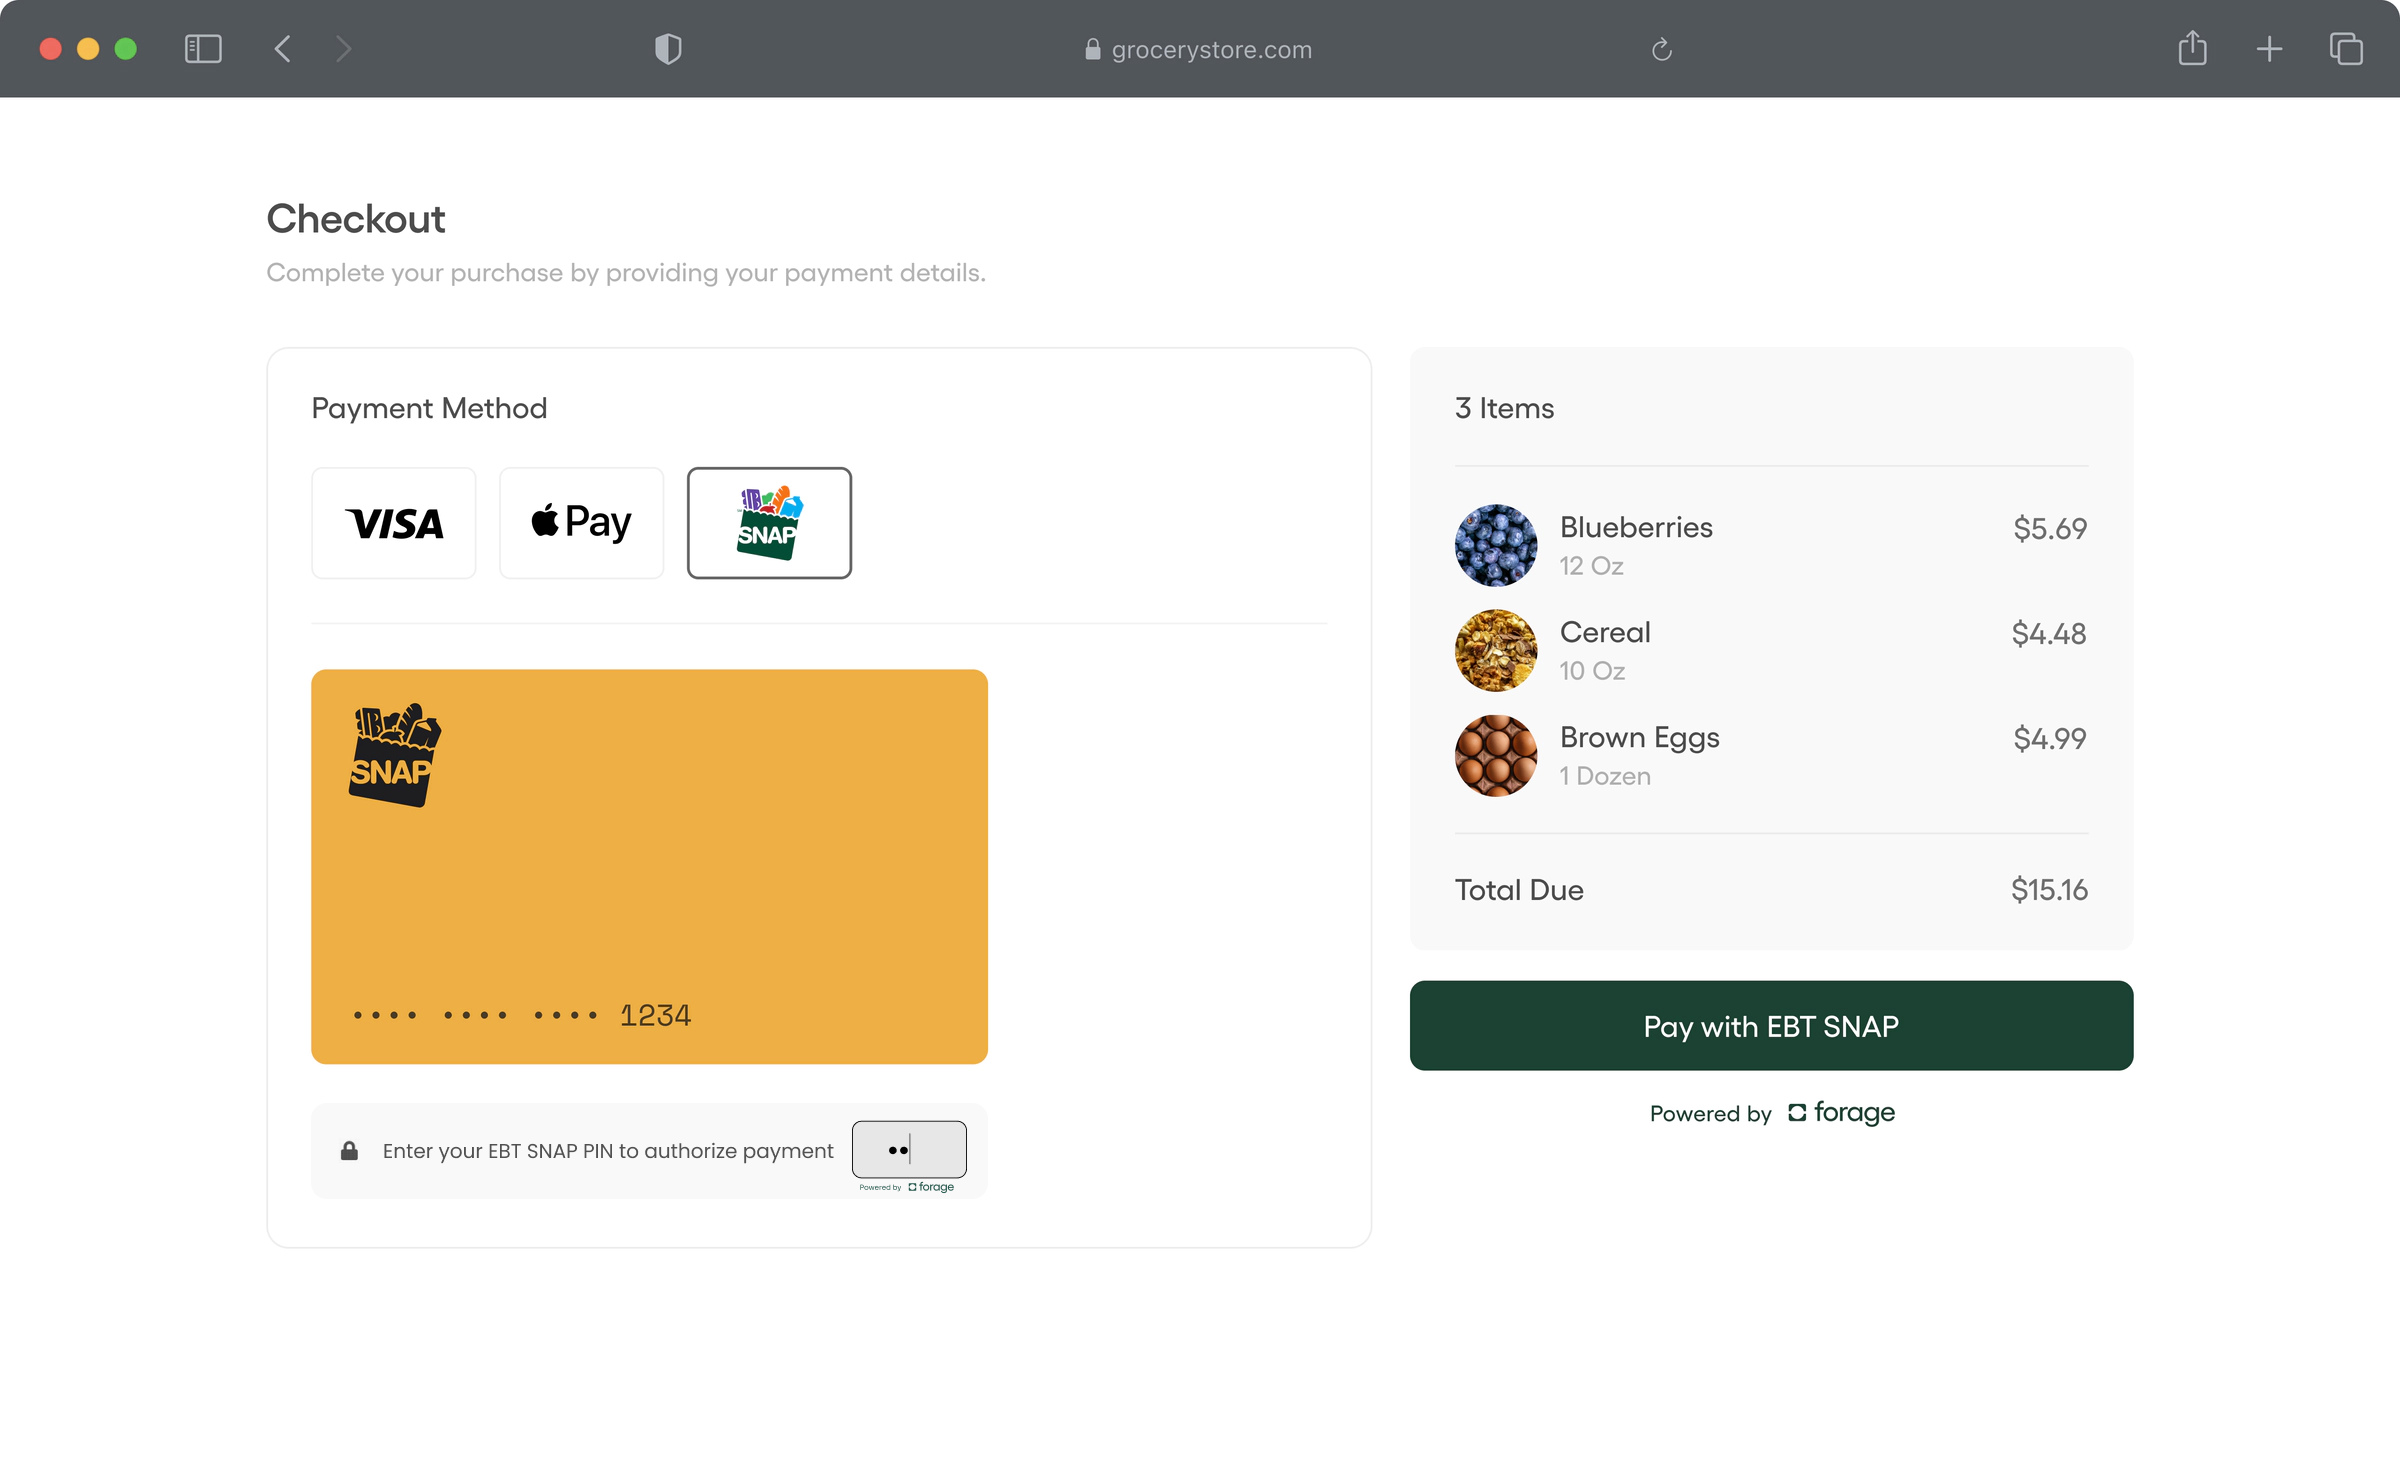 A desktop checkout screen lists an option to pay with EBT SNAP powered by Forage